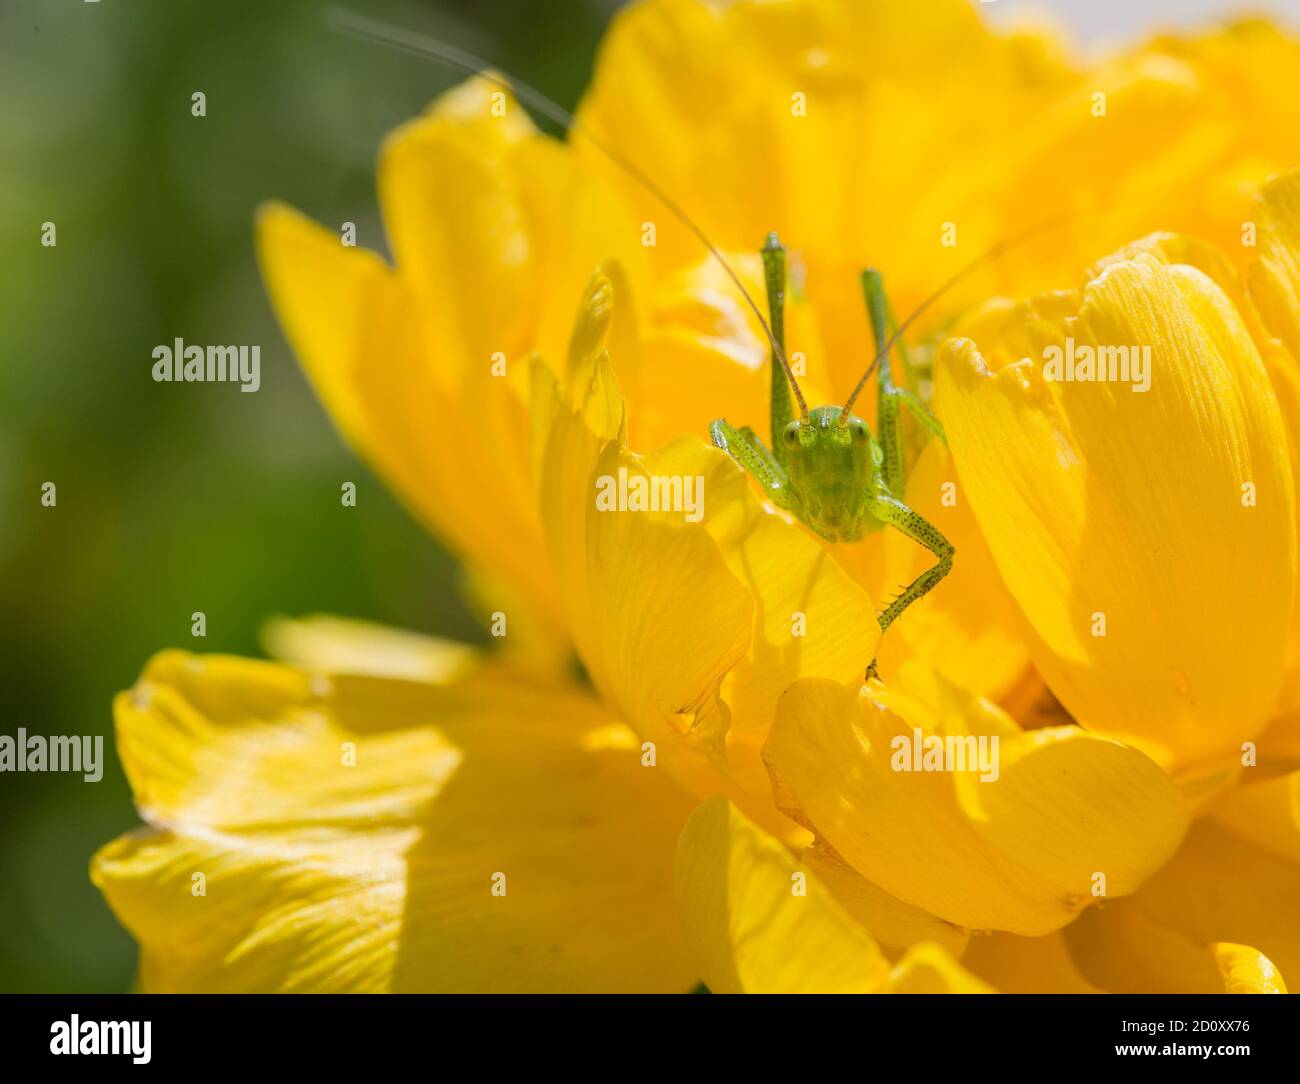 Green cricket on a yellow flower. Stock Photo